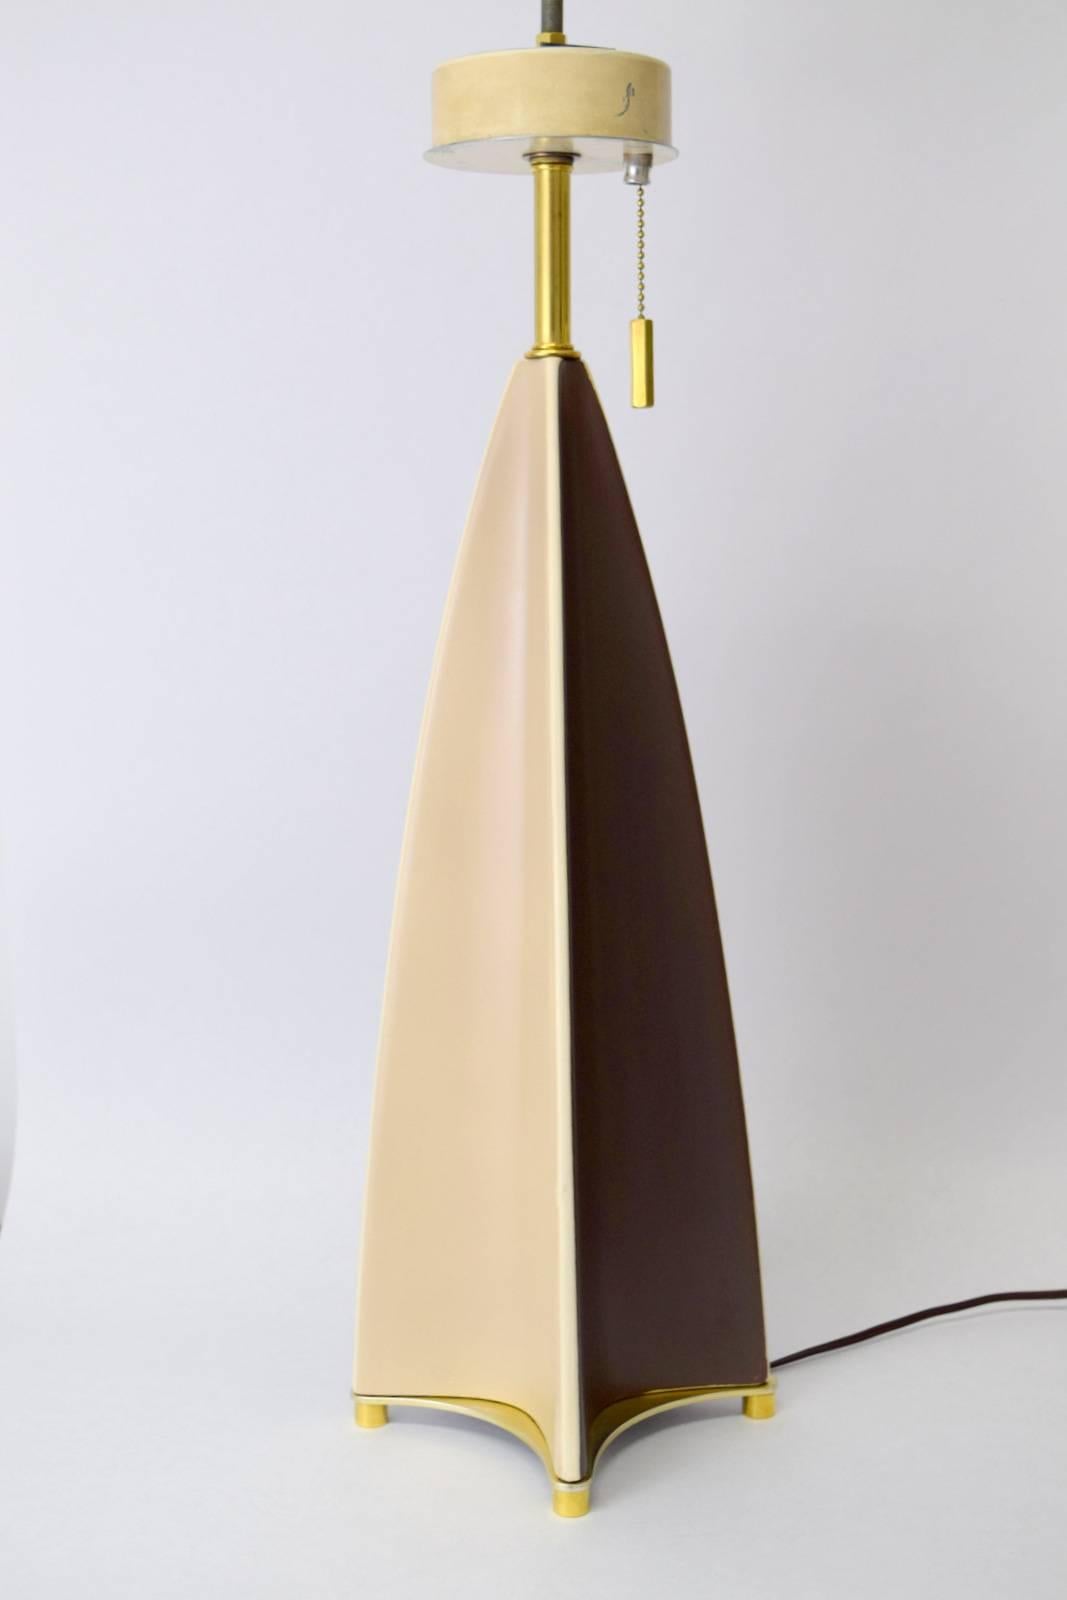 Amazing parabolic fin lamp by Gerald Thurston for Lightolier. Stoneware base in coffee and cream glaze with white line along spines separating concave sides. Original three-part light socket with three-way pull chain with original finial. Sits on